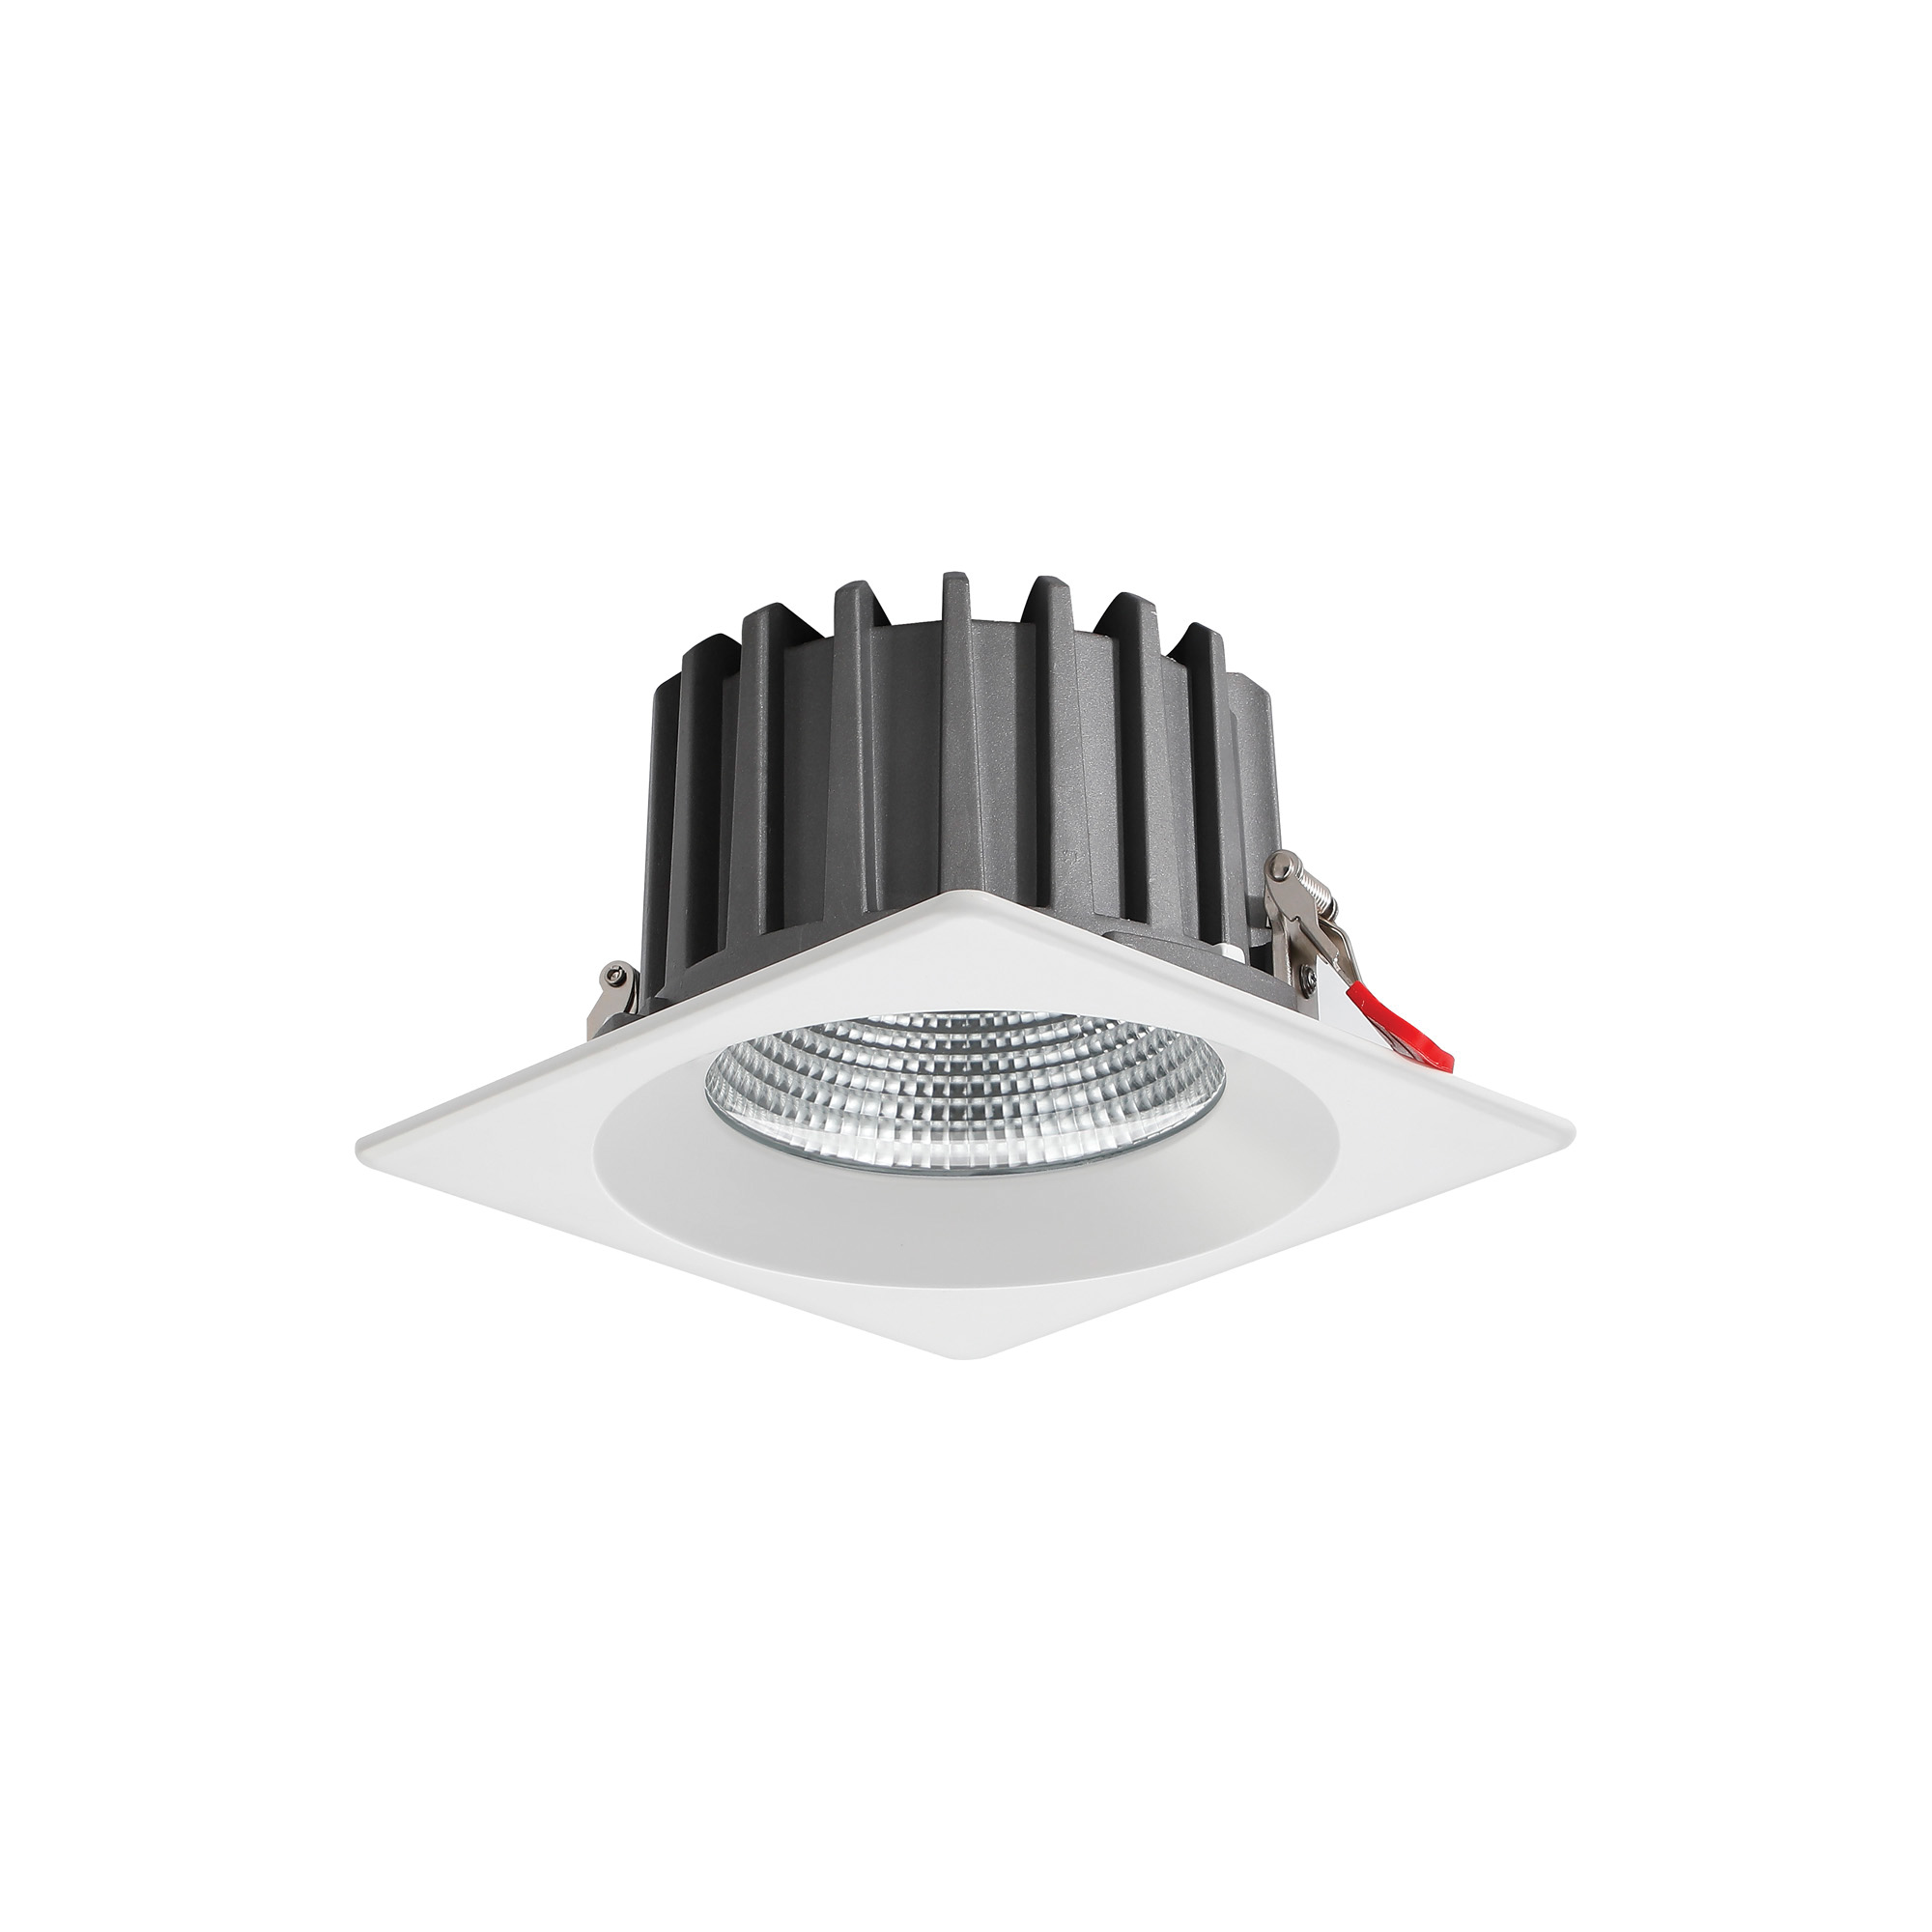 DL200074  Bionic 24; 24W; 700mA; White Deep Square Recessed Downlight; 1980lm ;Cut Out 155mm; 42° ; 4000K; IP44; DRIVER INC.; 5yrs Warranty.